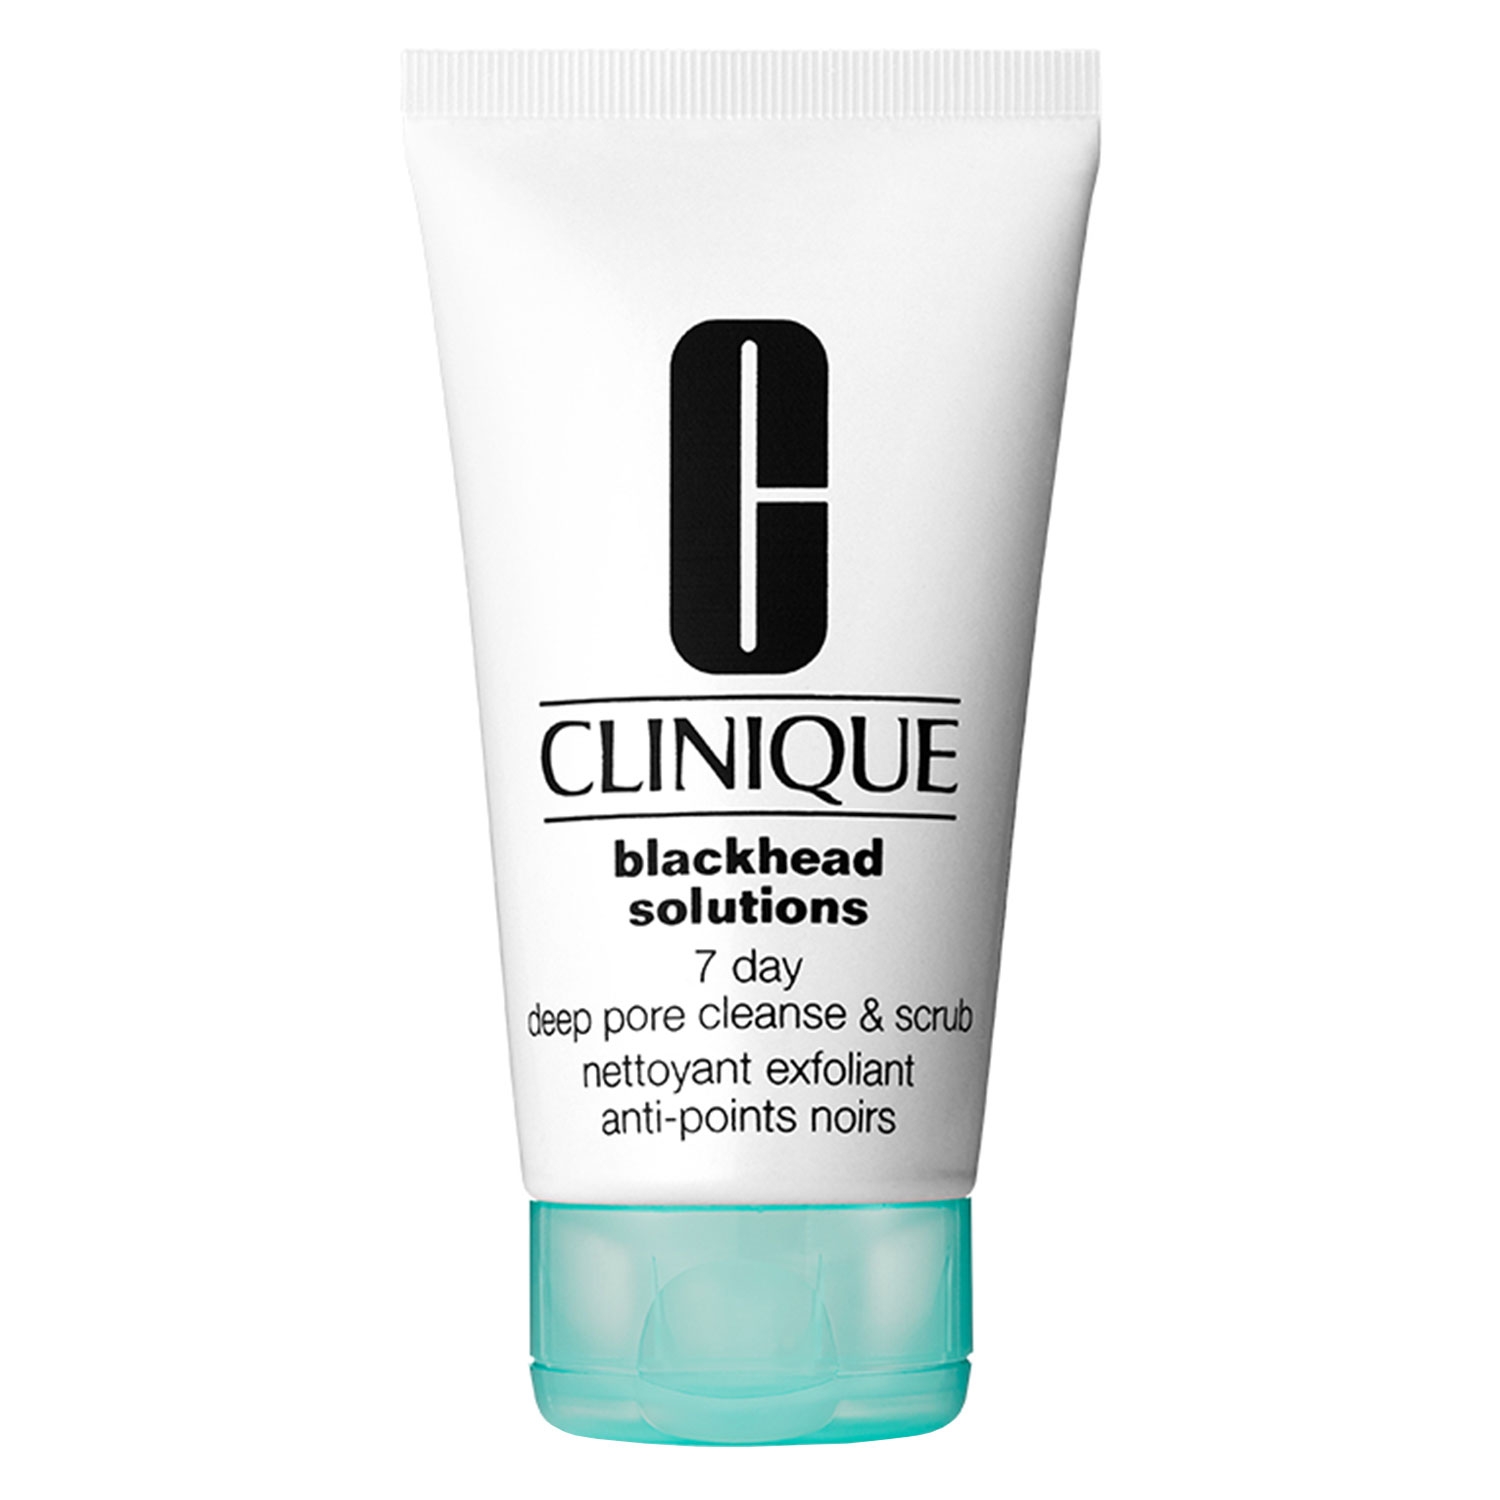 Product image from Blackhead Solutions - 7 Day Deep Pore Cleanse & Scrub